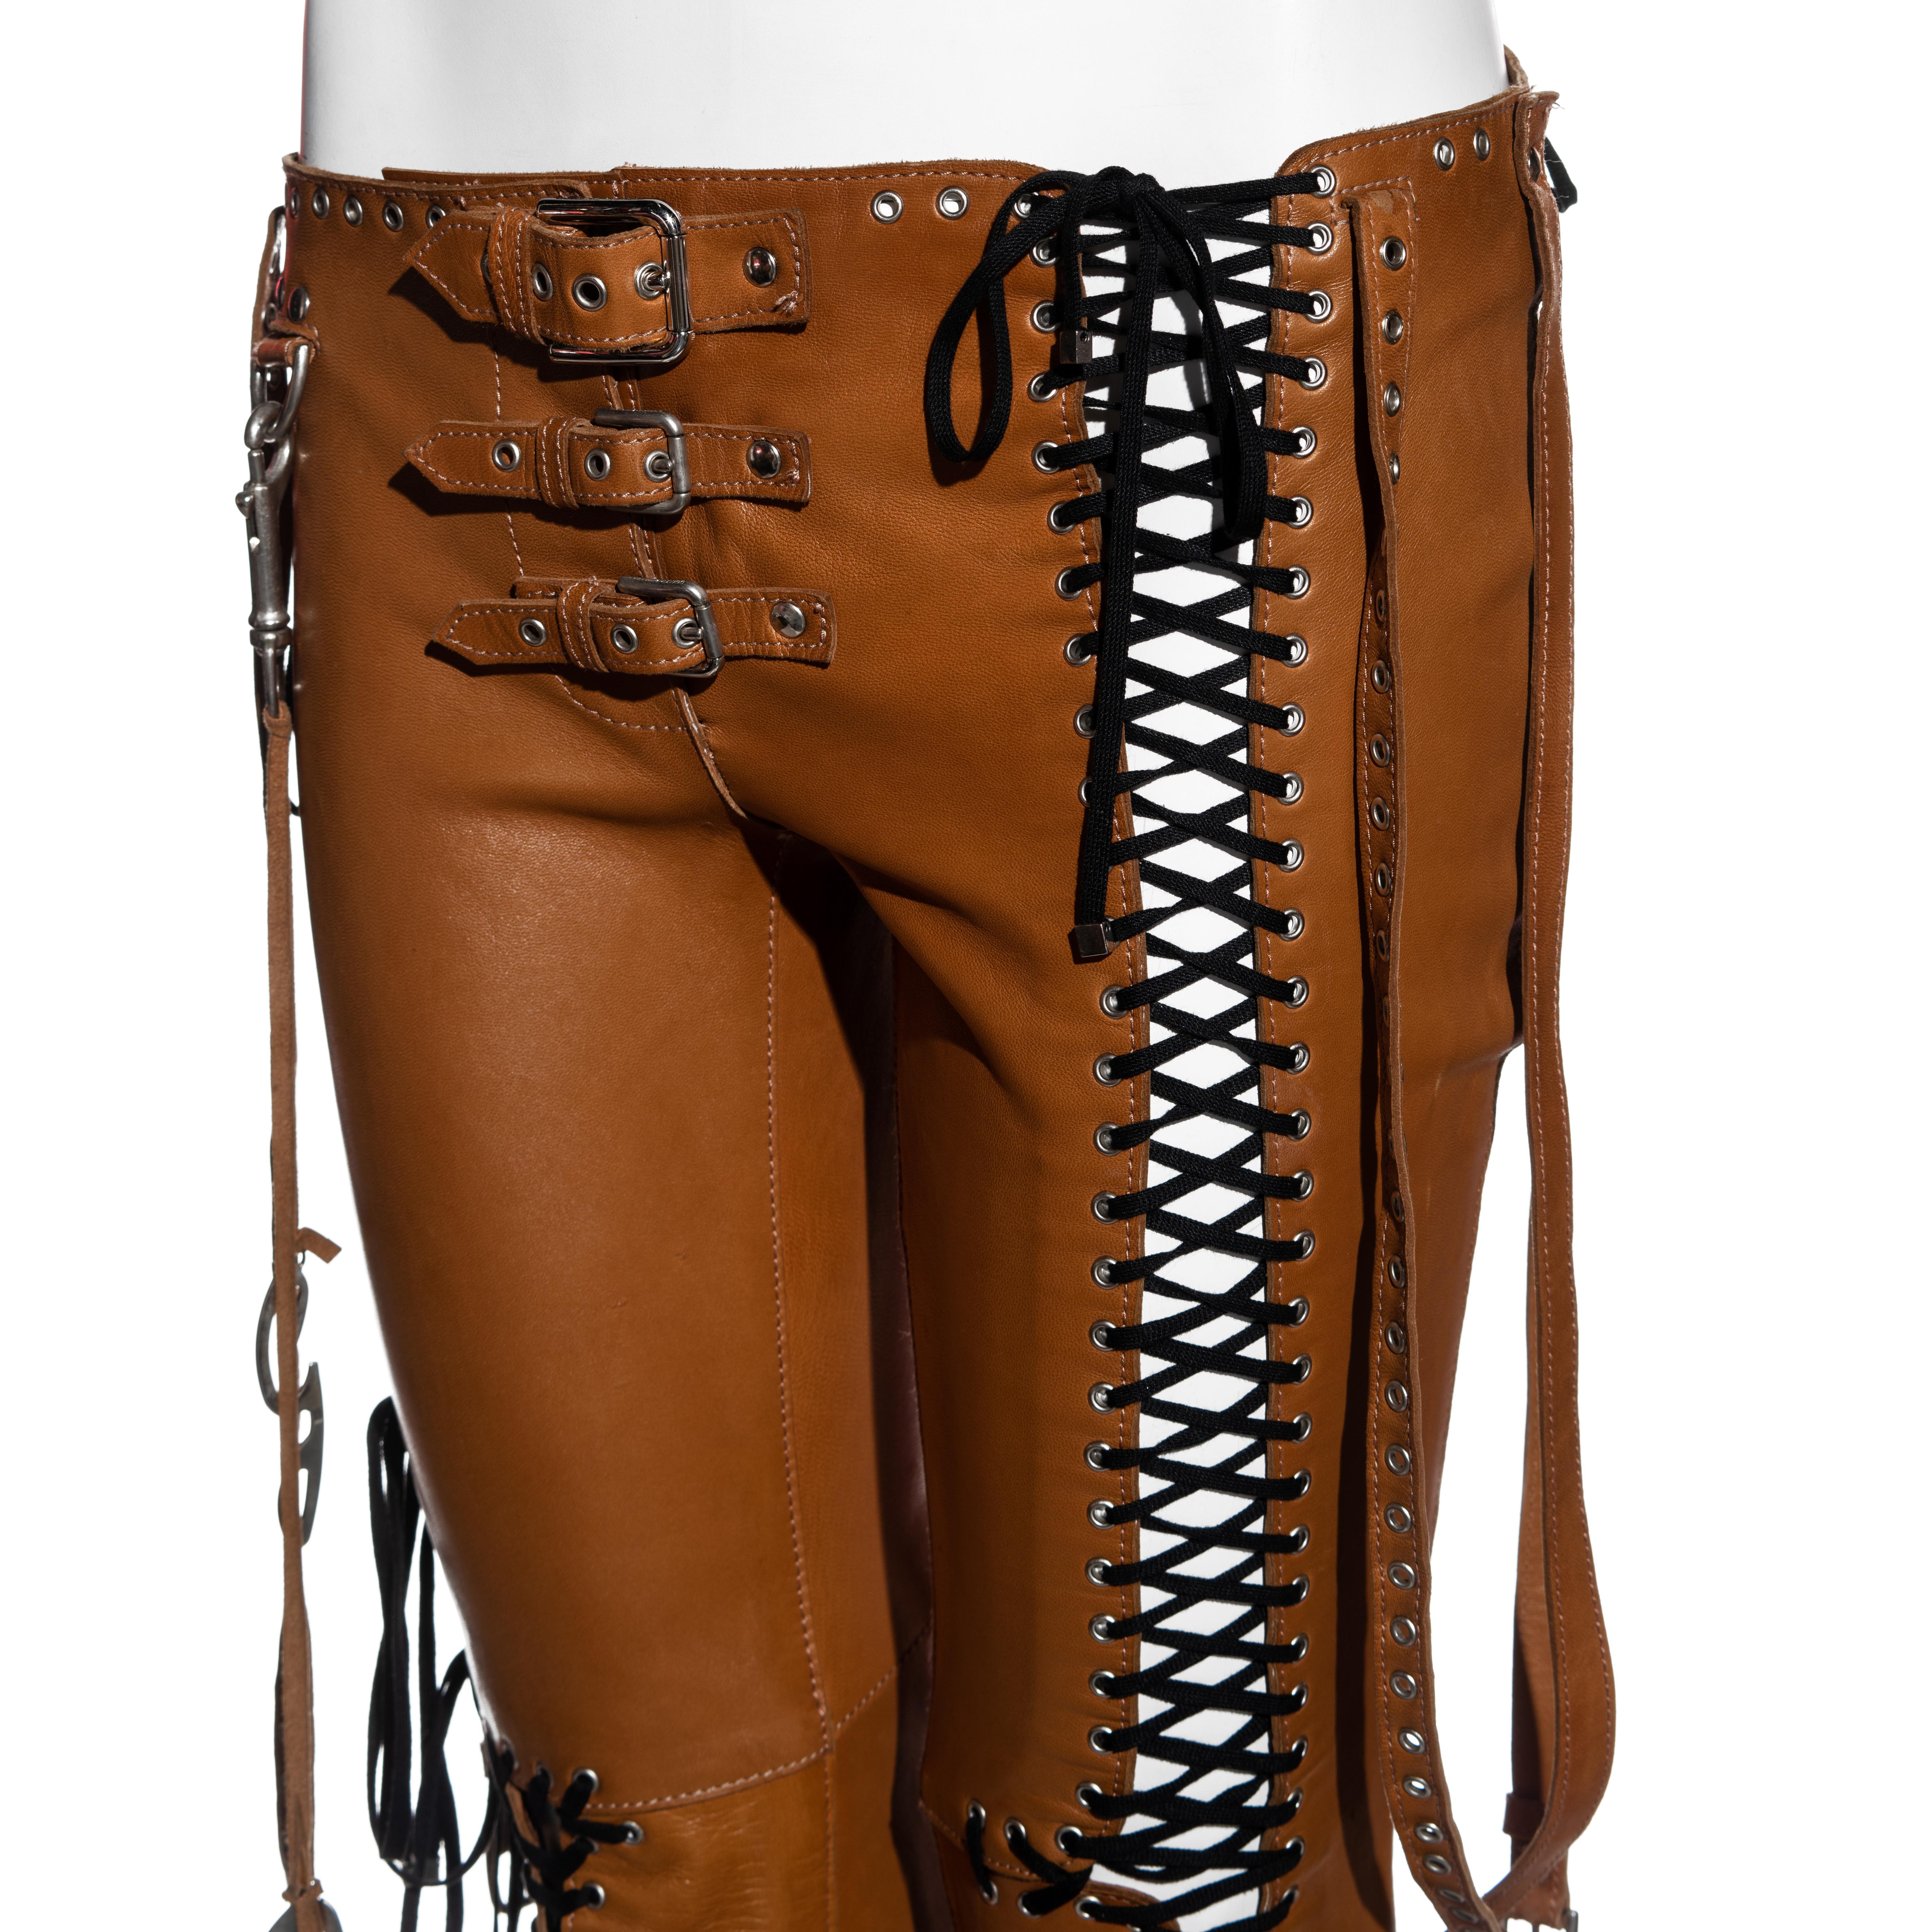 Dolce & Gabbana tan lace up leather pants, ss 2003 For Sale 2